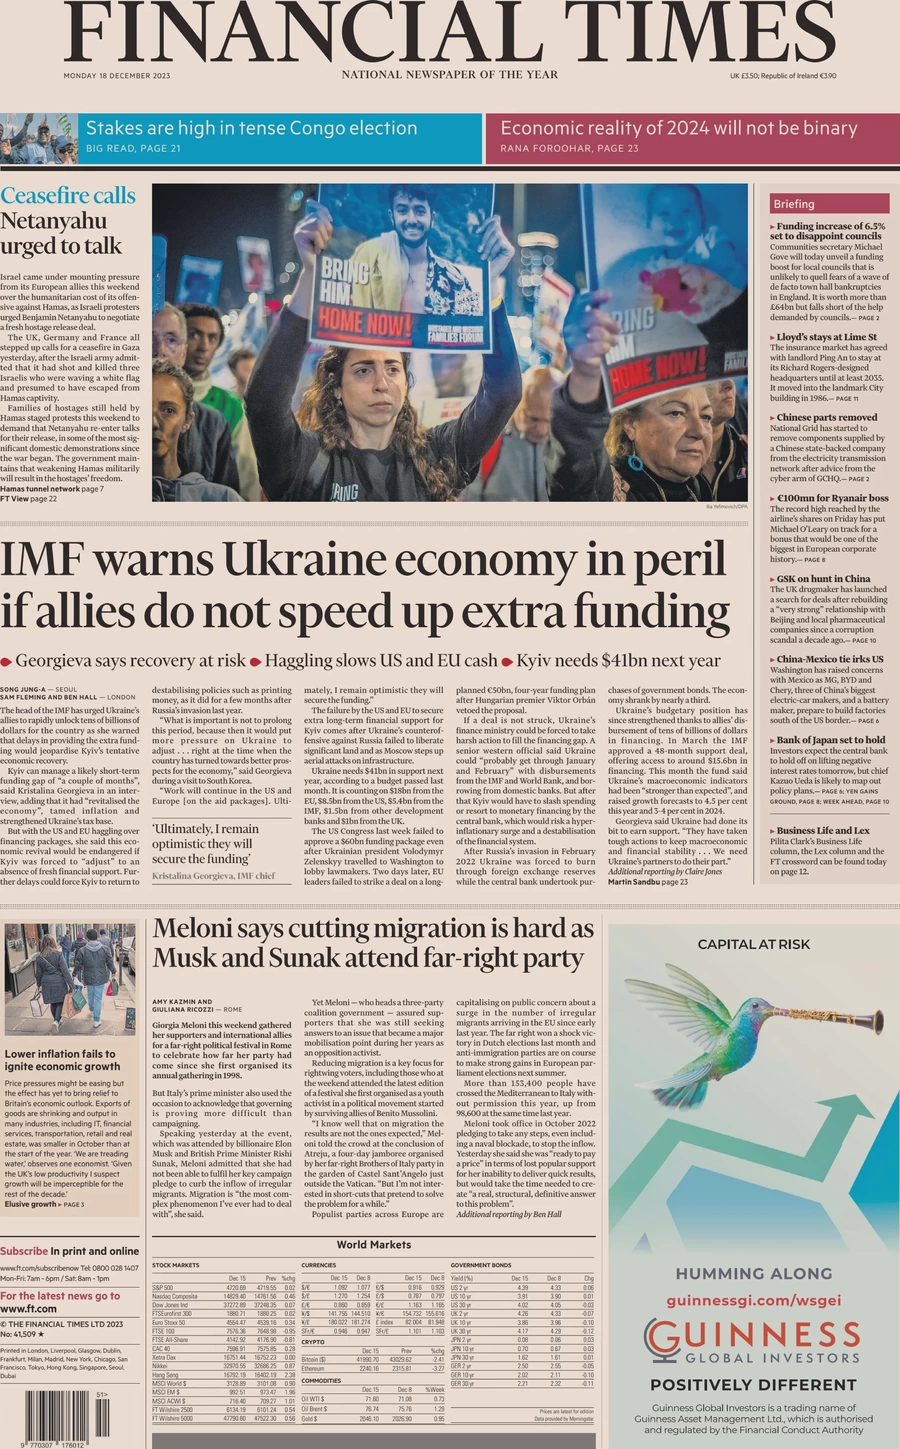 Financial Times - IMF warns Ukraine economy in peril if allies do not speed up extra funding 